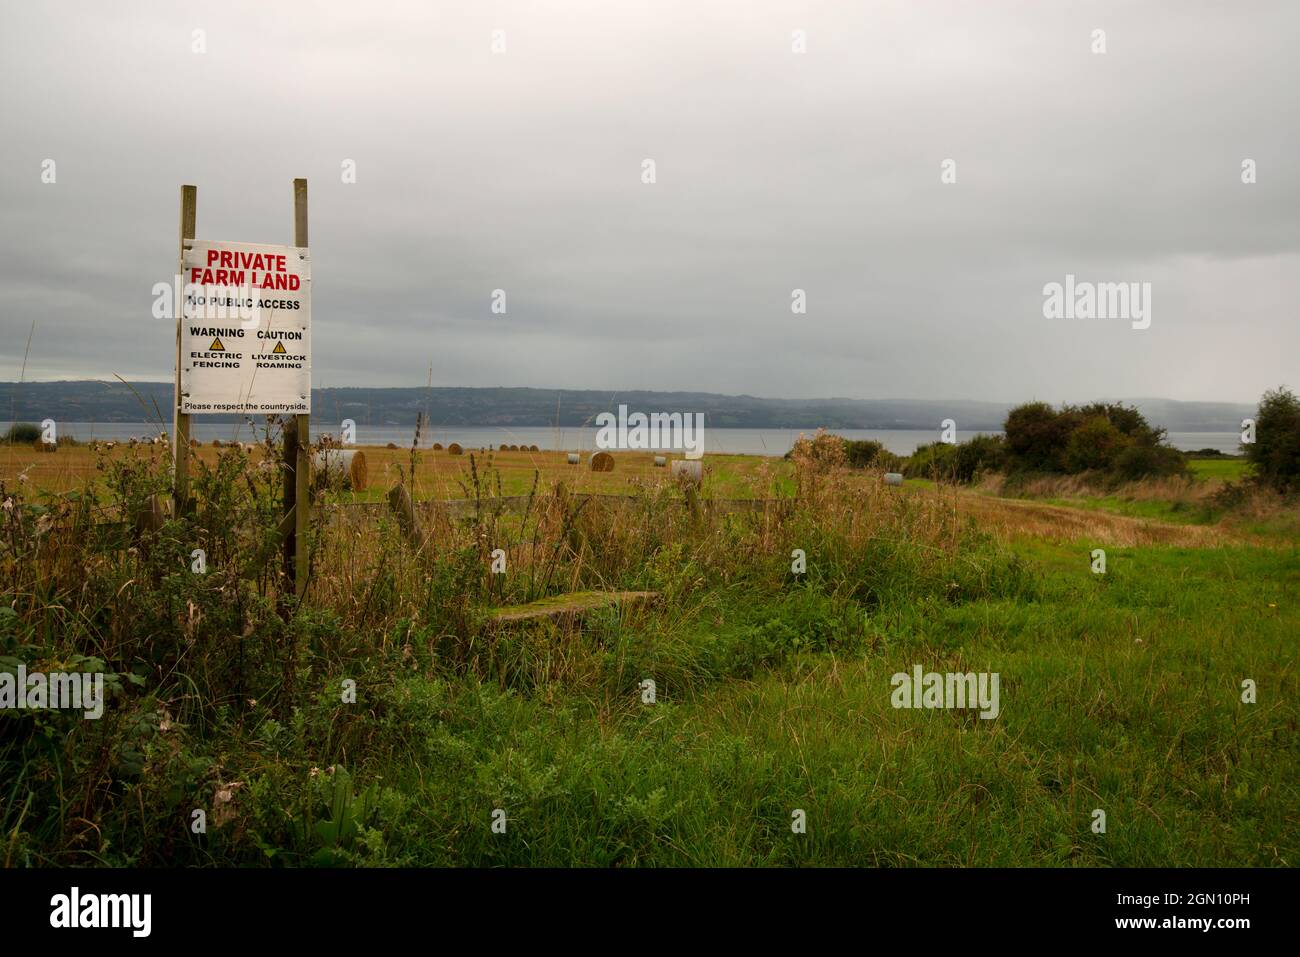 Farm land on The Wirral peninsula with a warning sign indicating that the land is private and does not allow public access Stock Photo